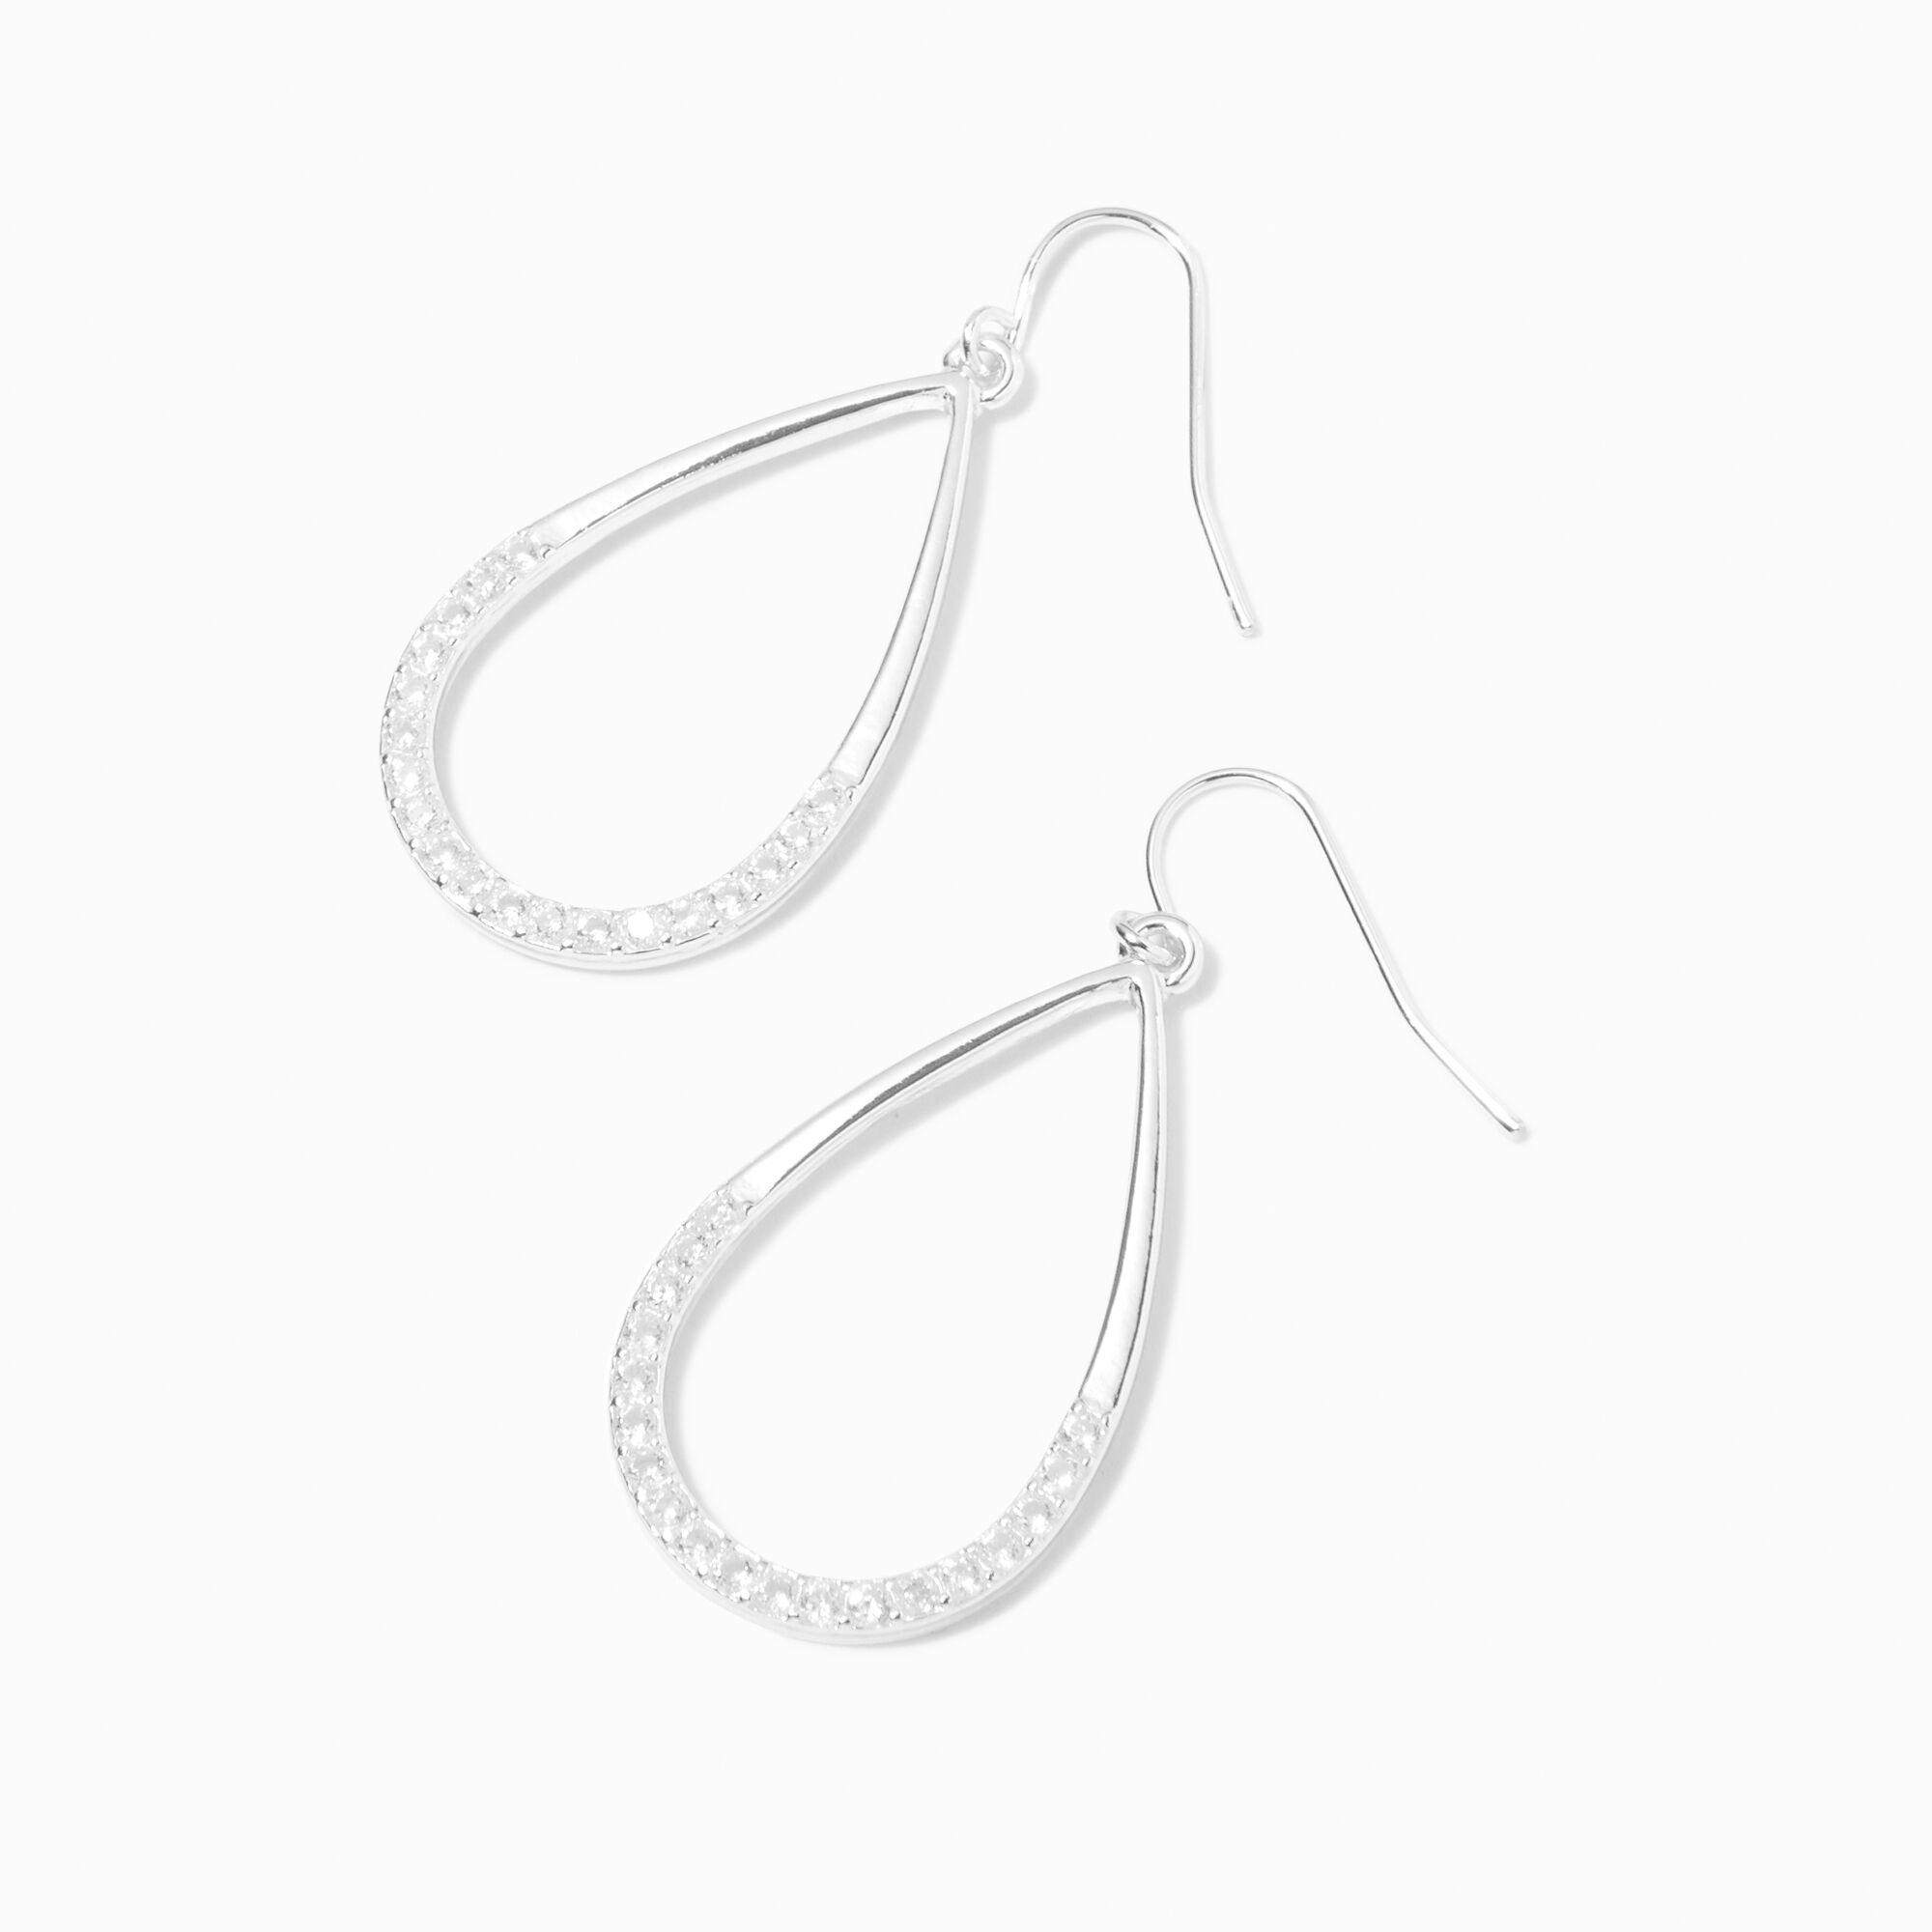 View Claires Tone 15 Embellished Teardrop Drop Earrings Silver information